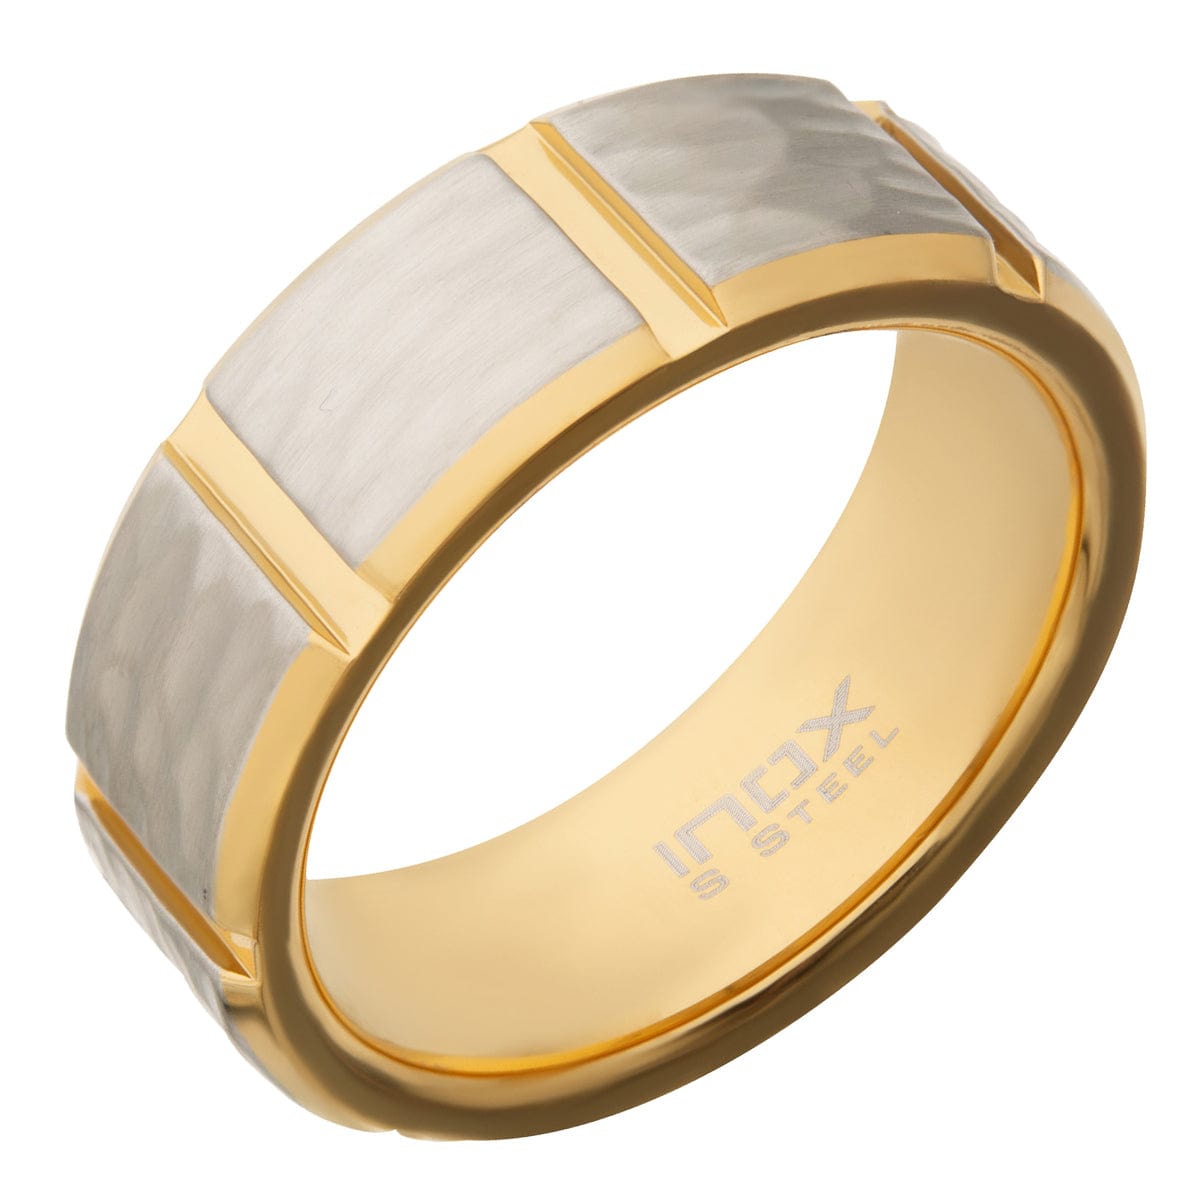 INOX JEWELRY Rings Golden Tone and Silver Tone Stainless Steel Hammered Finish Modern Block Band Ring